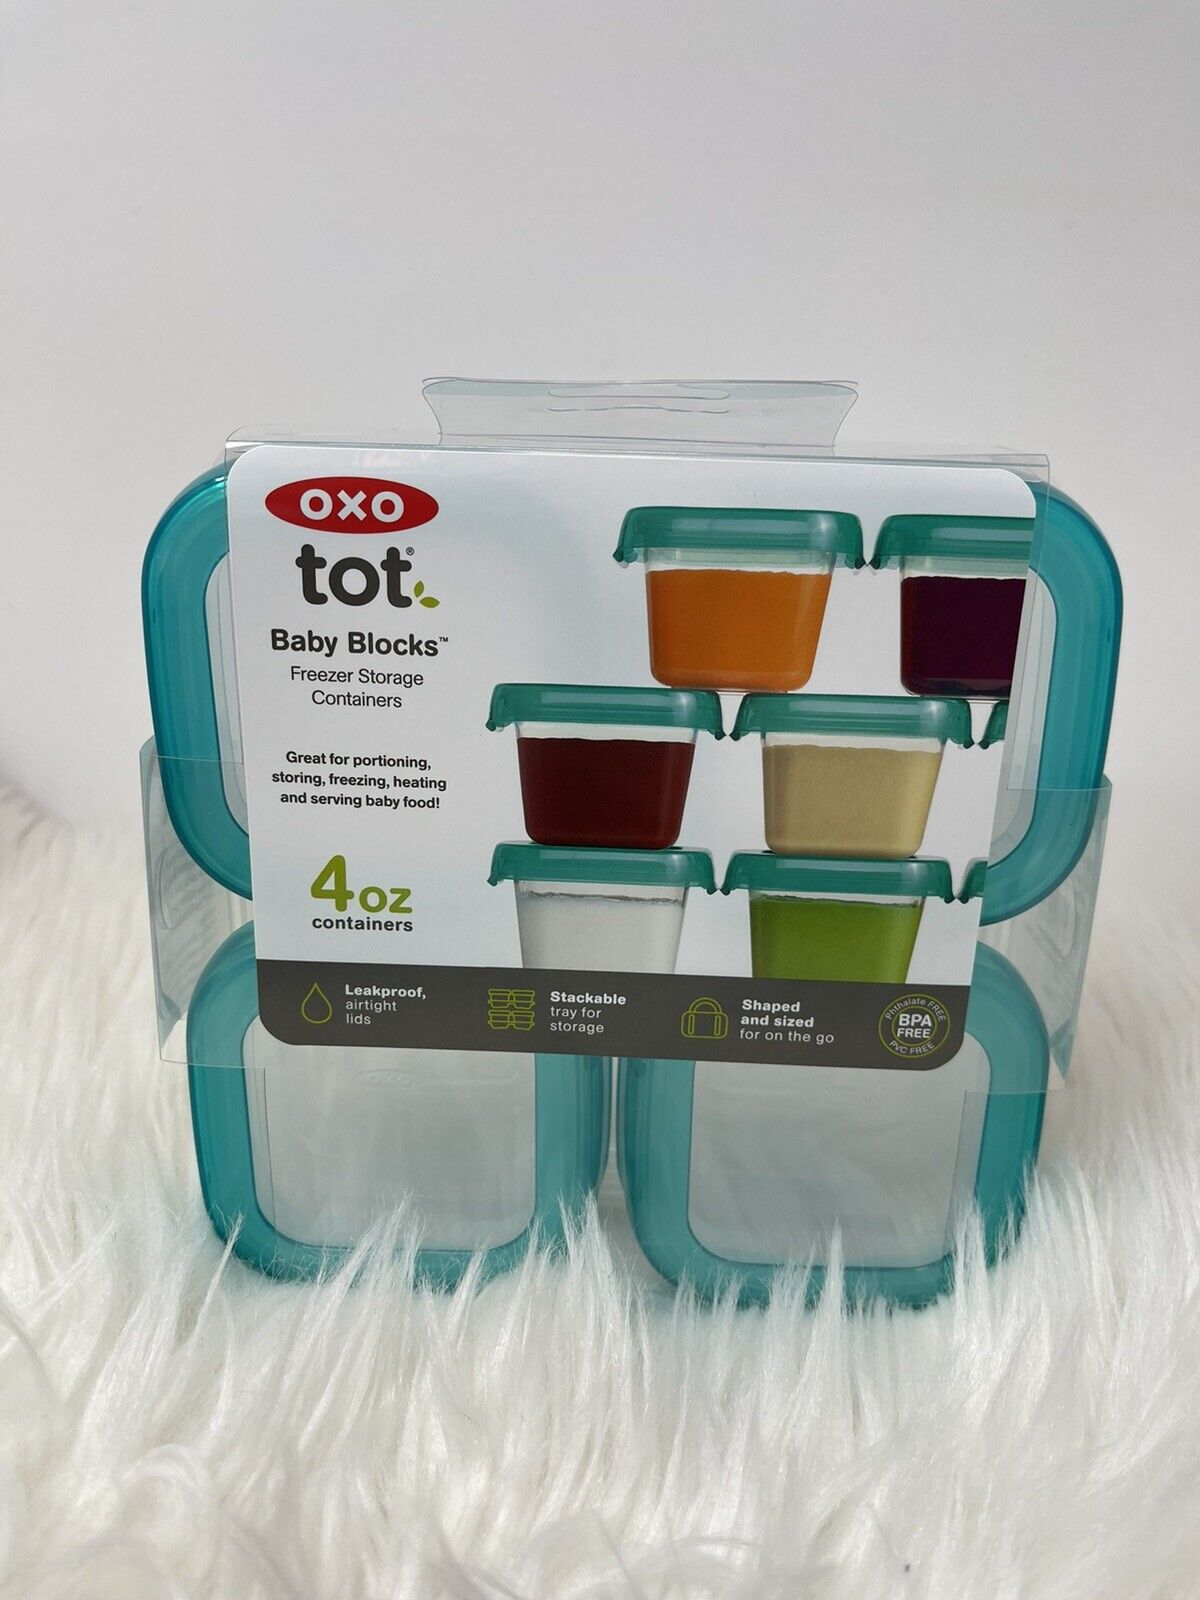 Oxo Tot Baby Blocks Plastic Freezer Storage Containers 4 Oz New In Teal